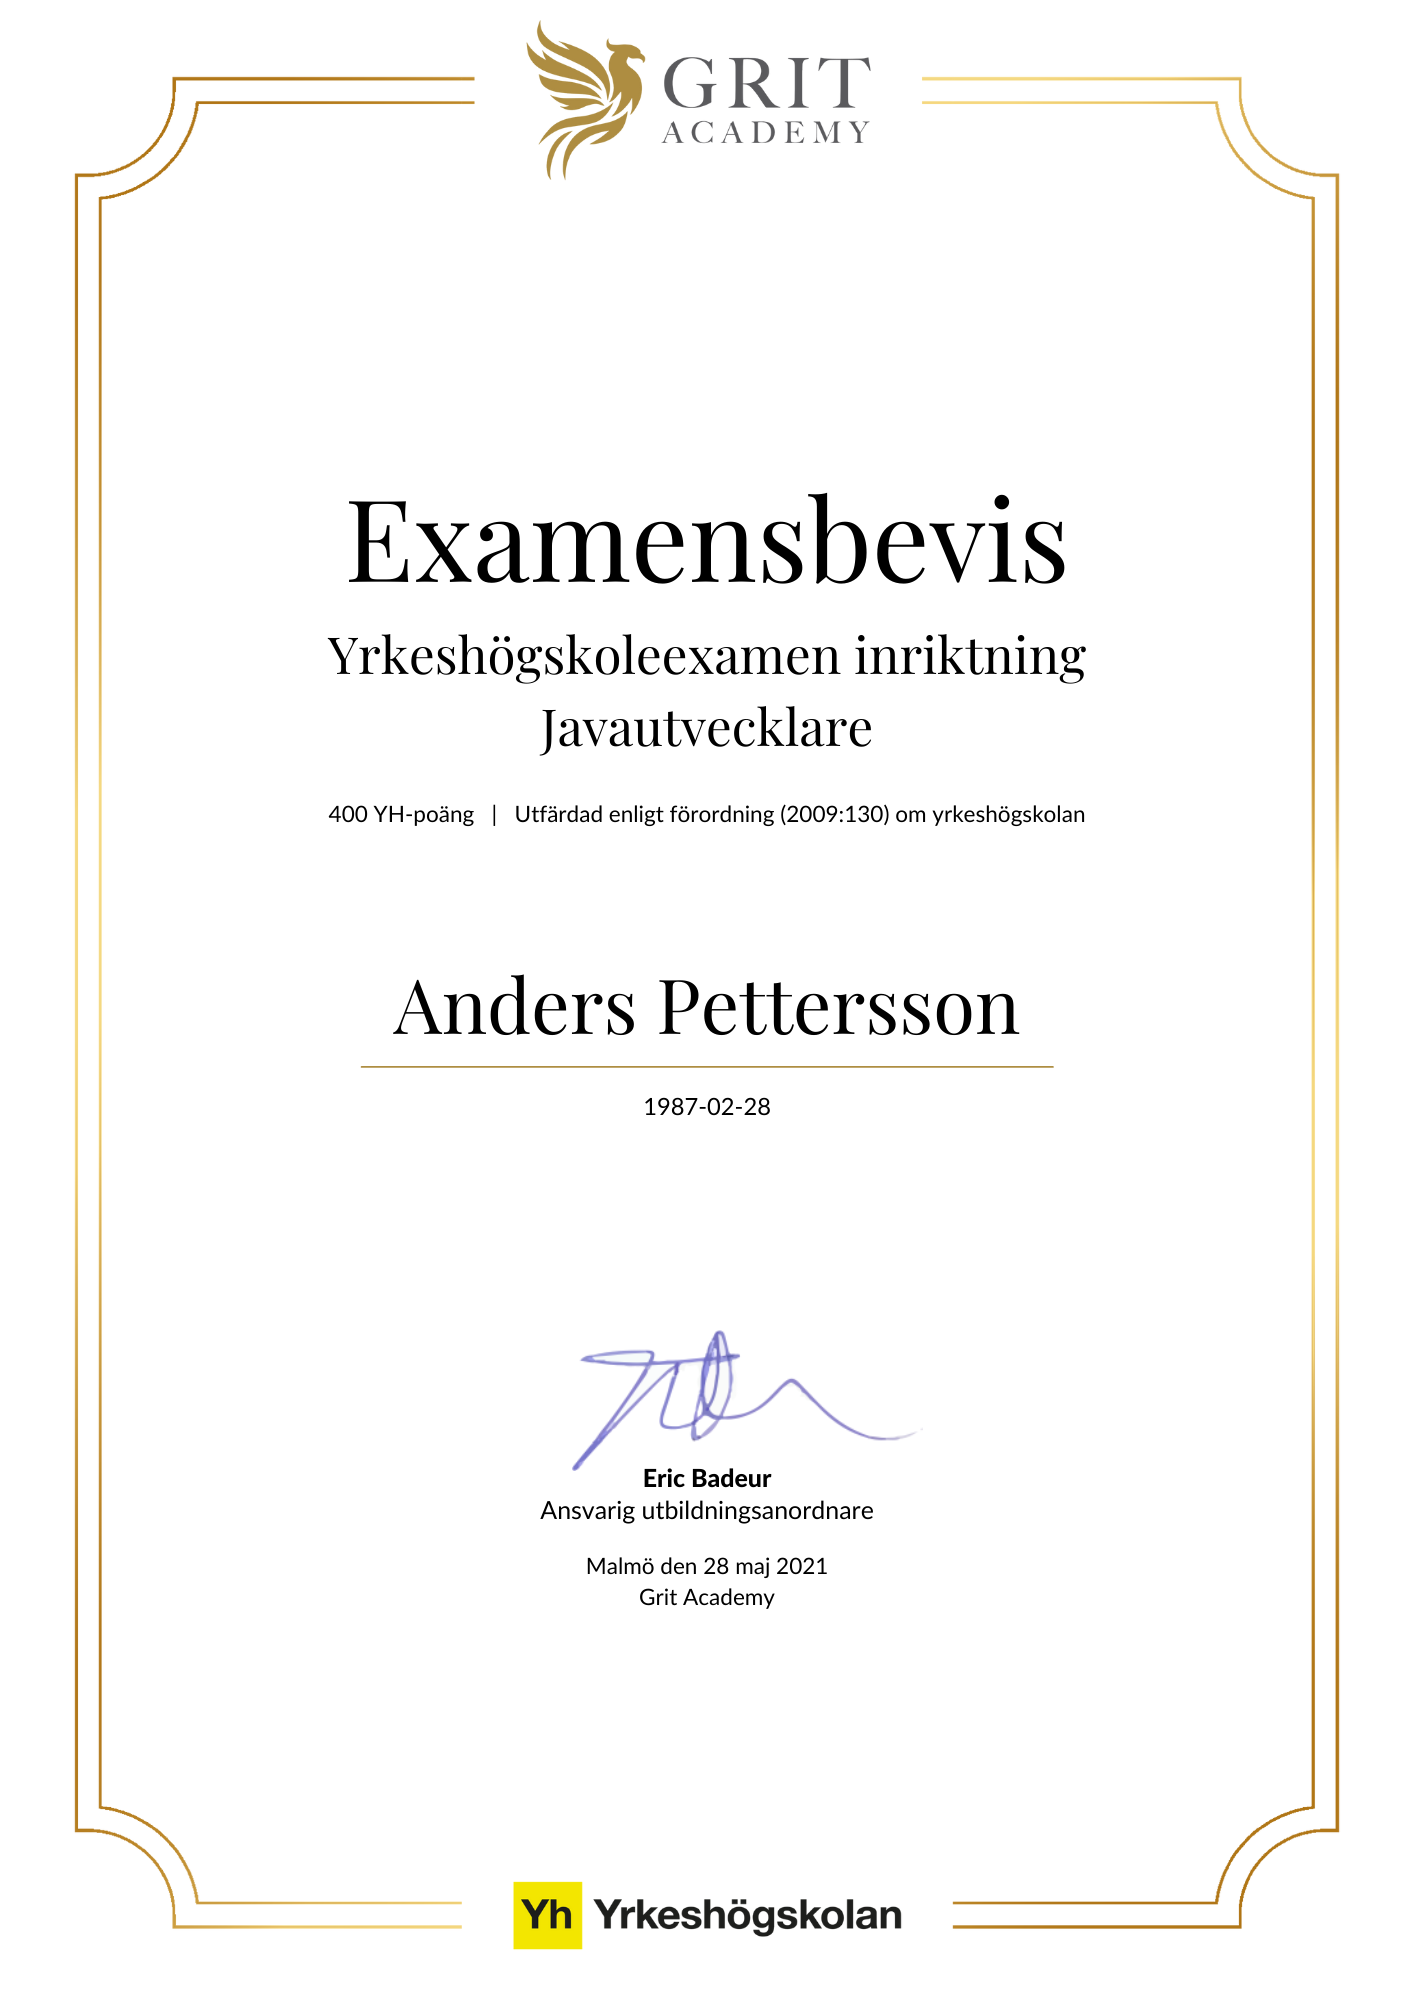 Examensbevis Anders Pettersson - 1